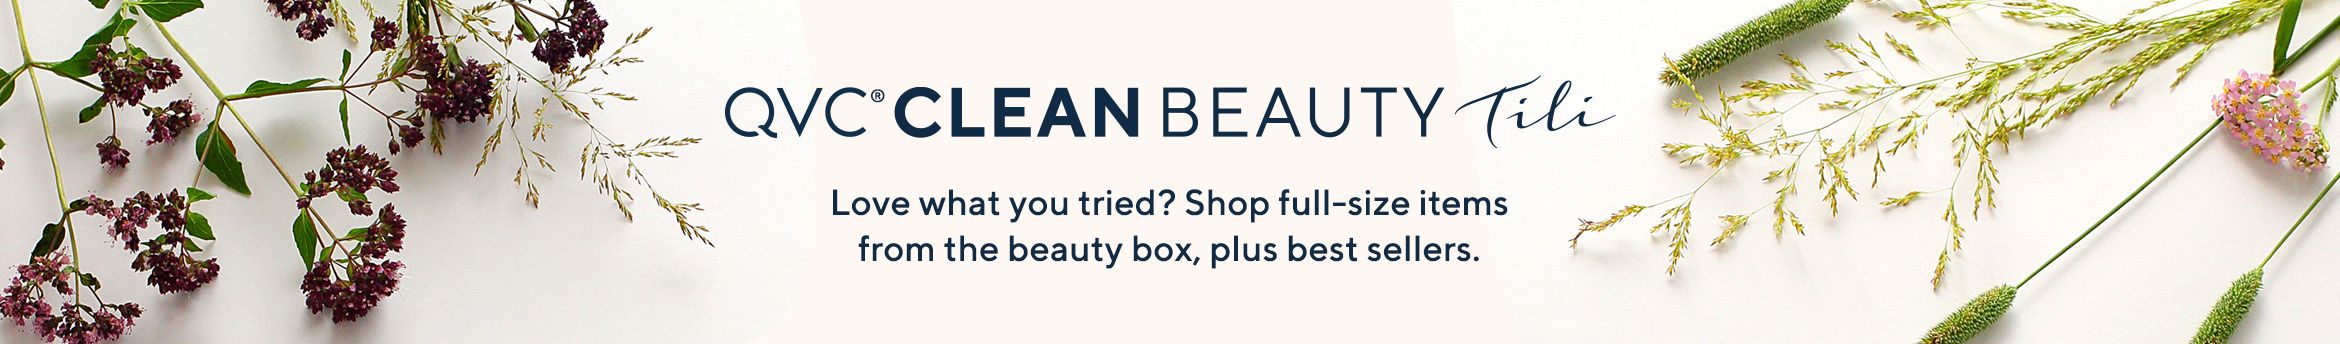 QVC® Clean Beauty TILI - Love what you tried? Shop full-size items from the beauty box, plus best sellers.